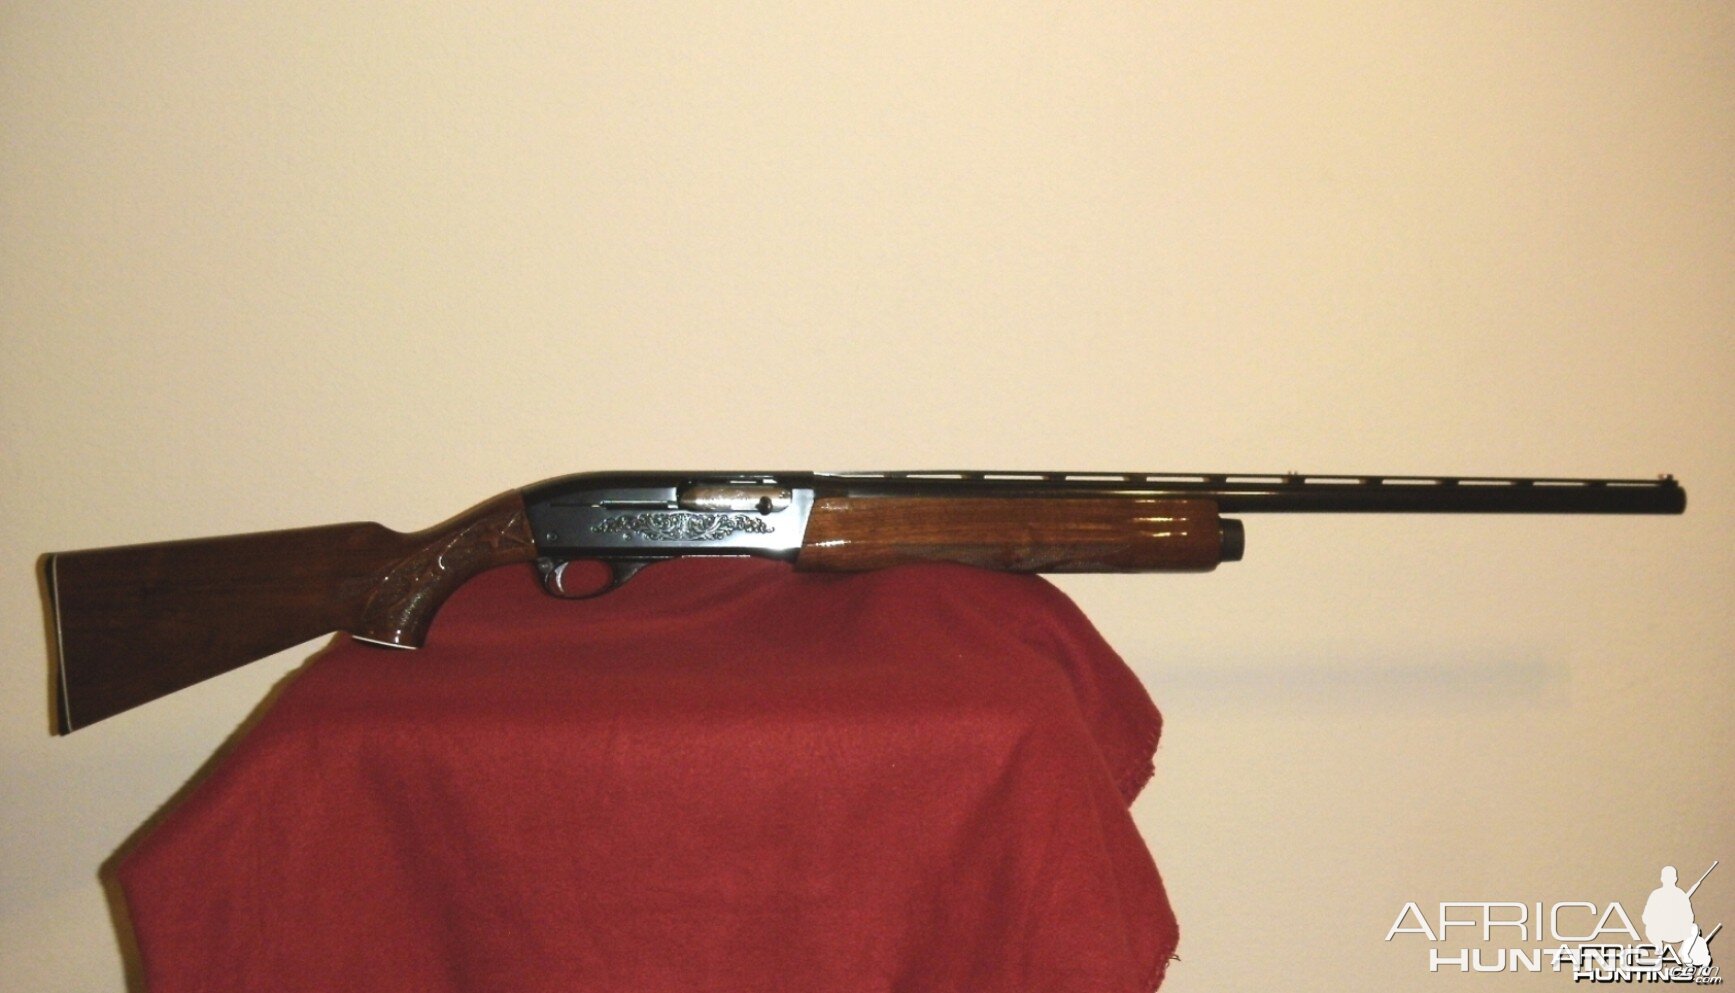 1 of my remington 1100's in MINT cond!